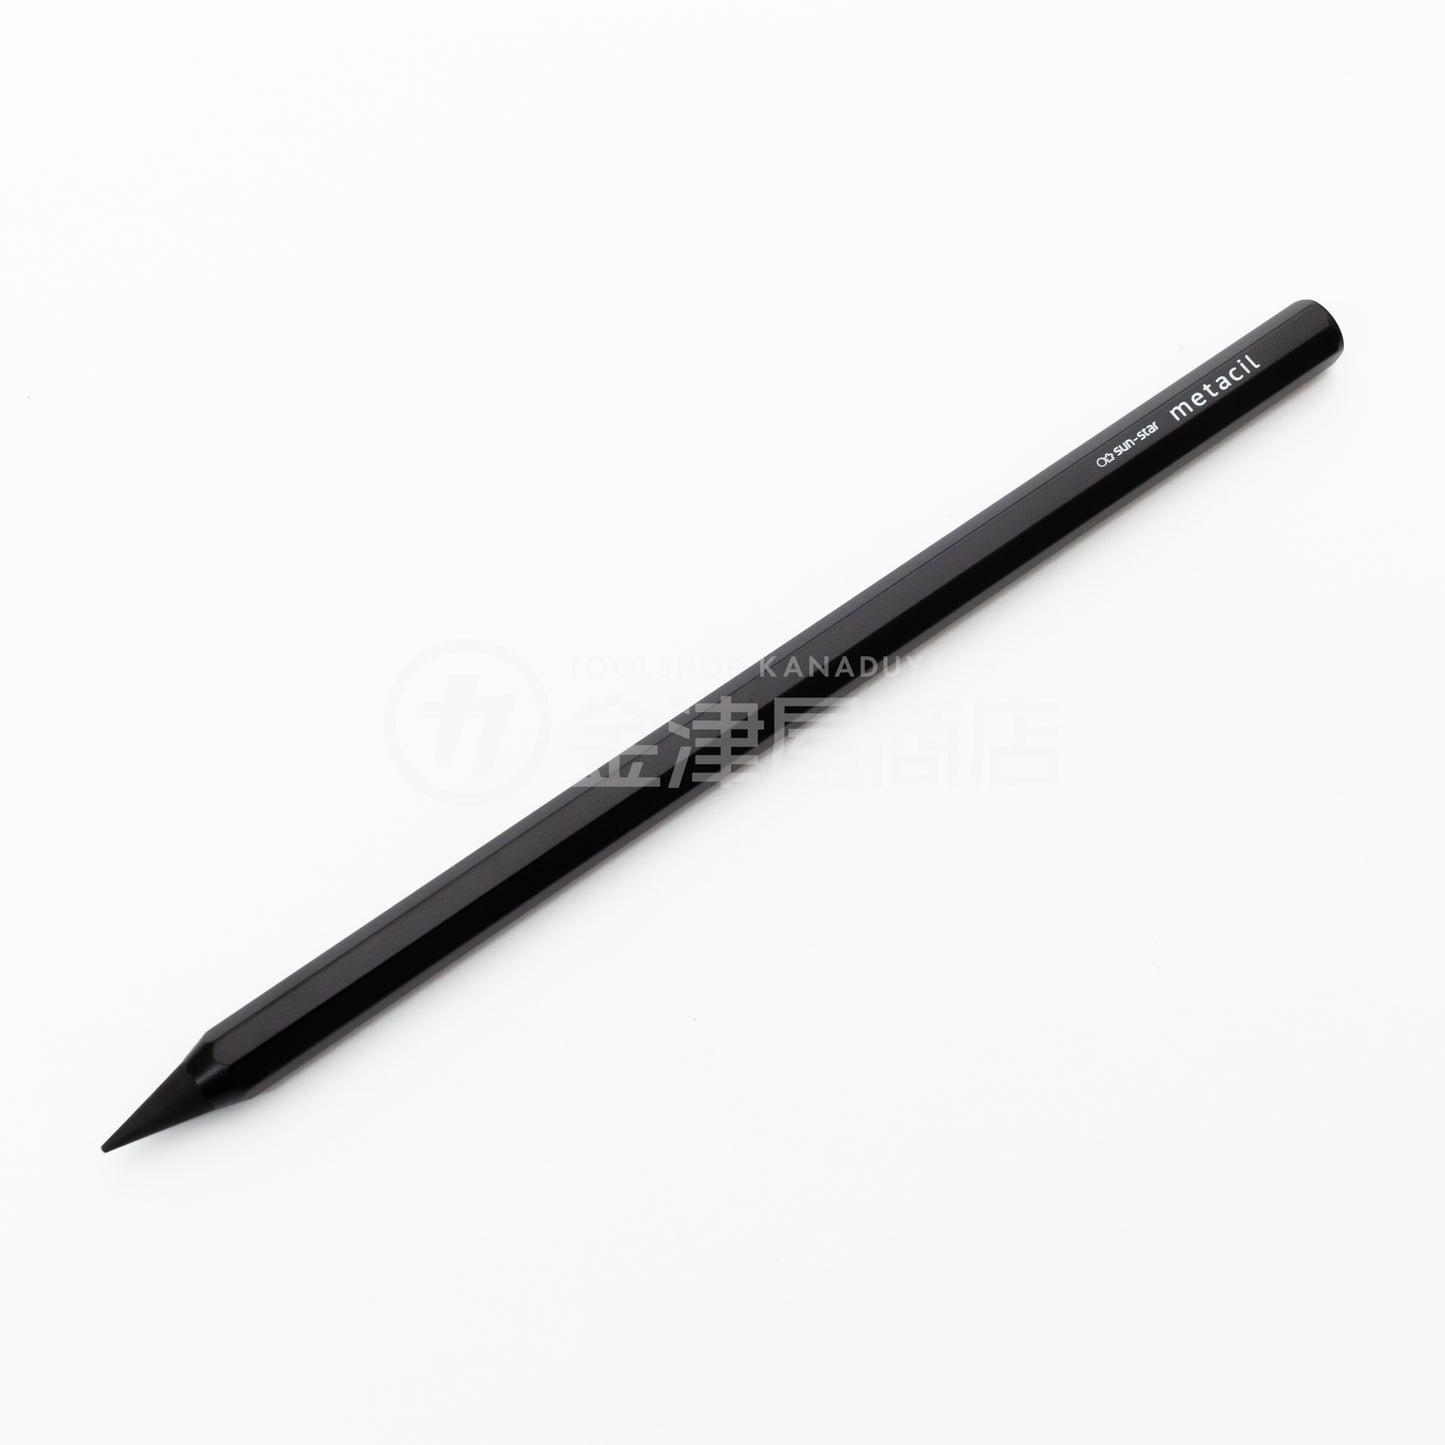 Shipping by mail] Sunstar Stationery metacil metal pencil that keeps – FUJIX